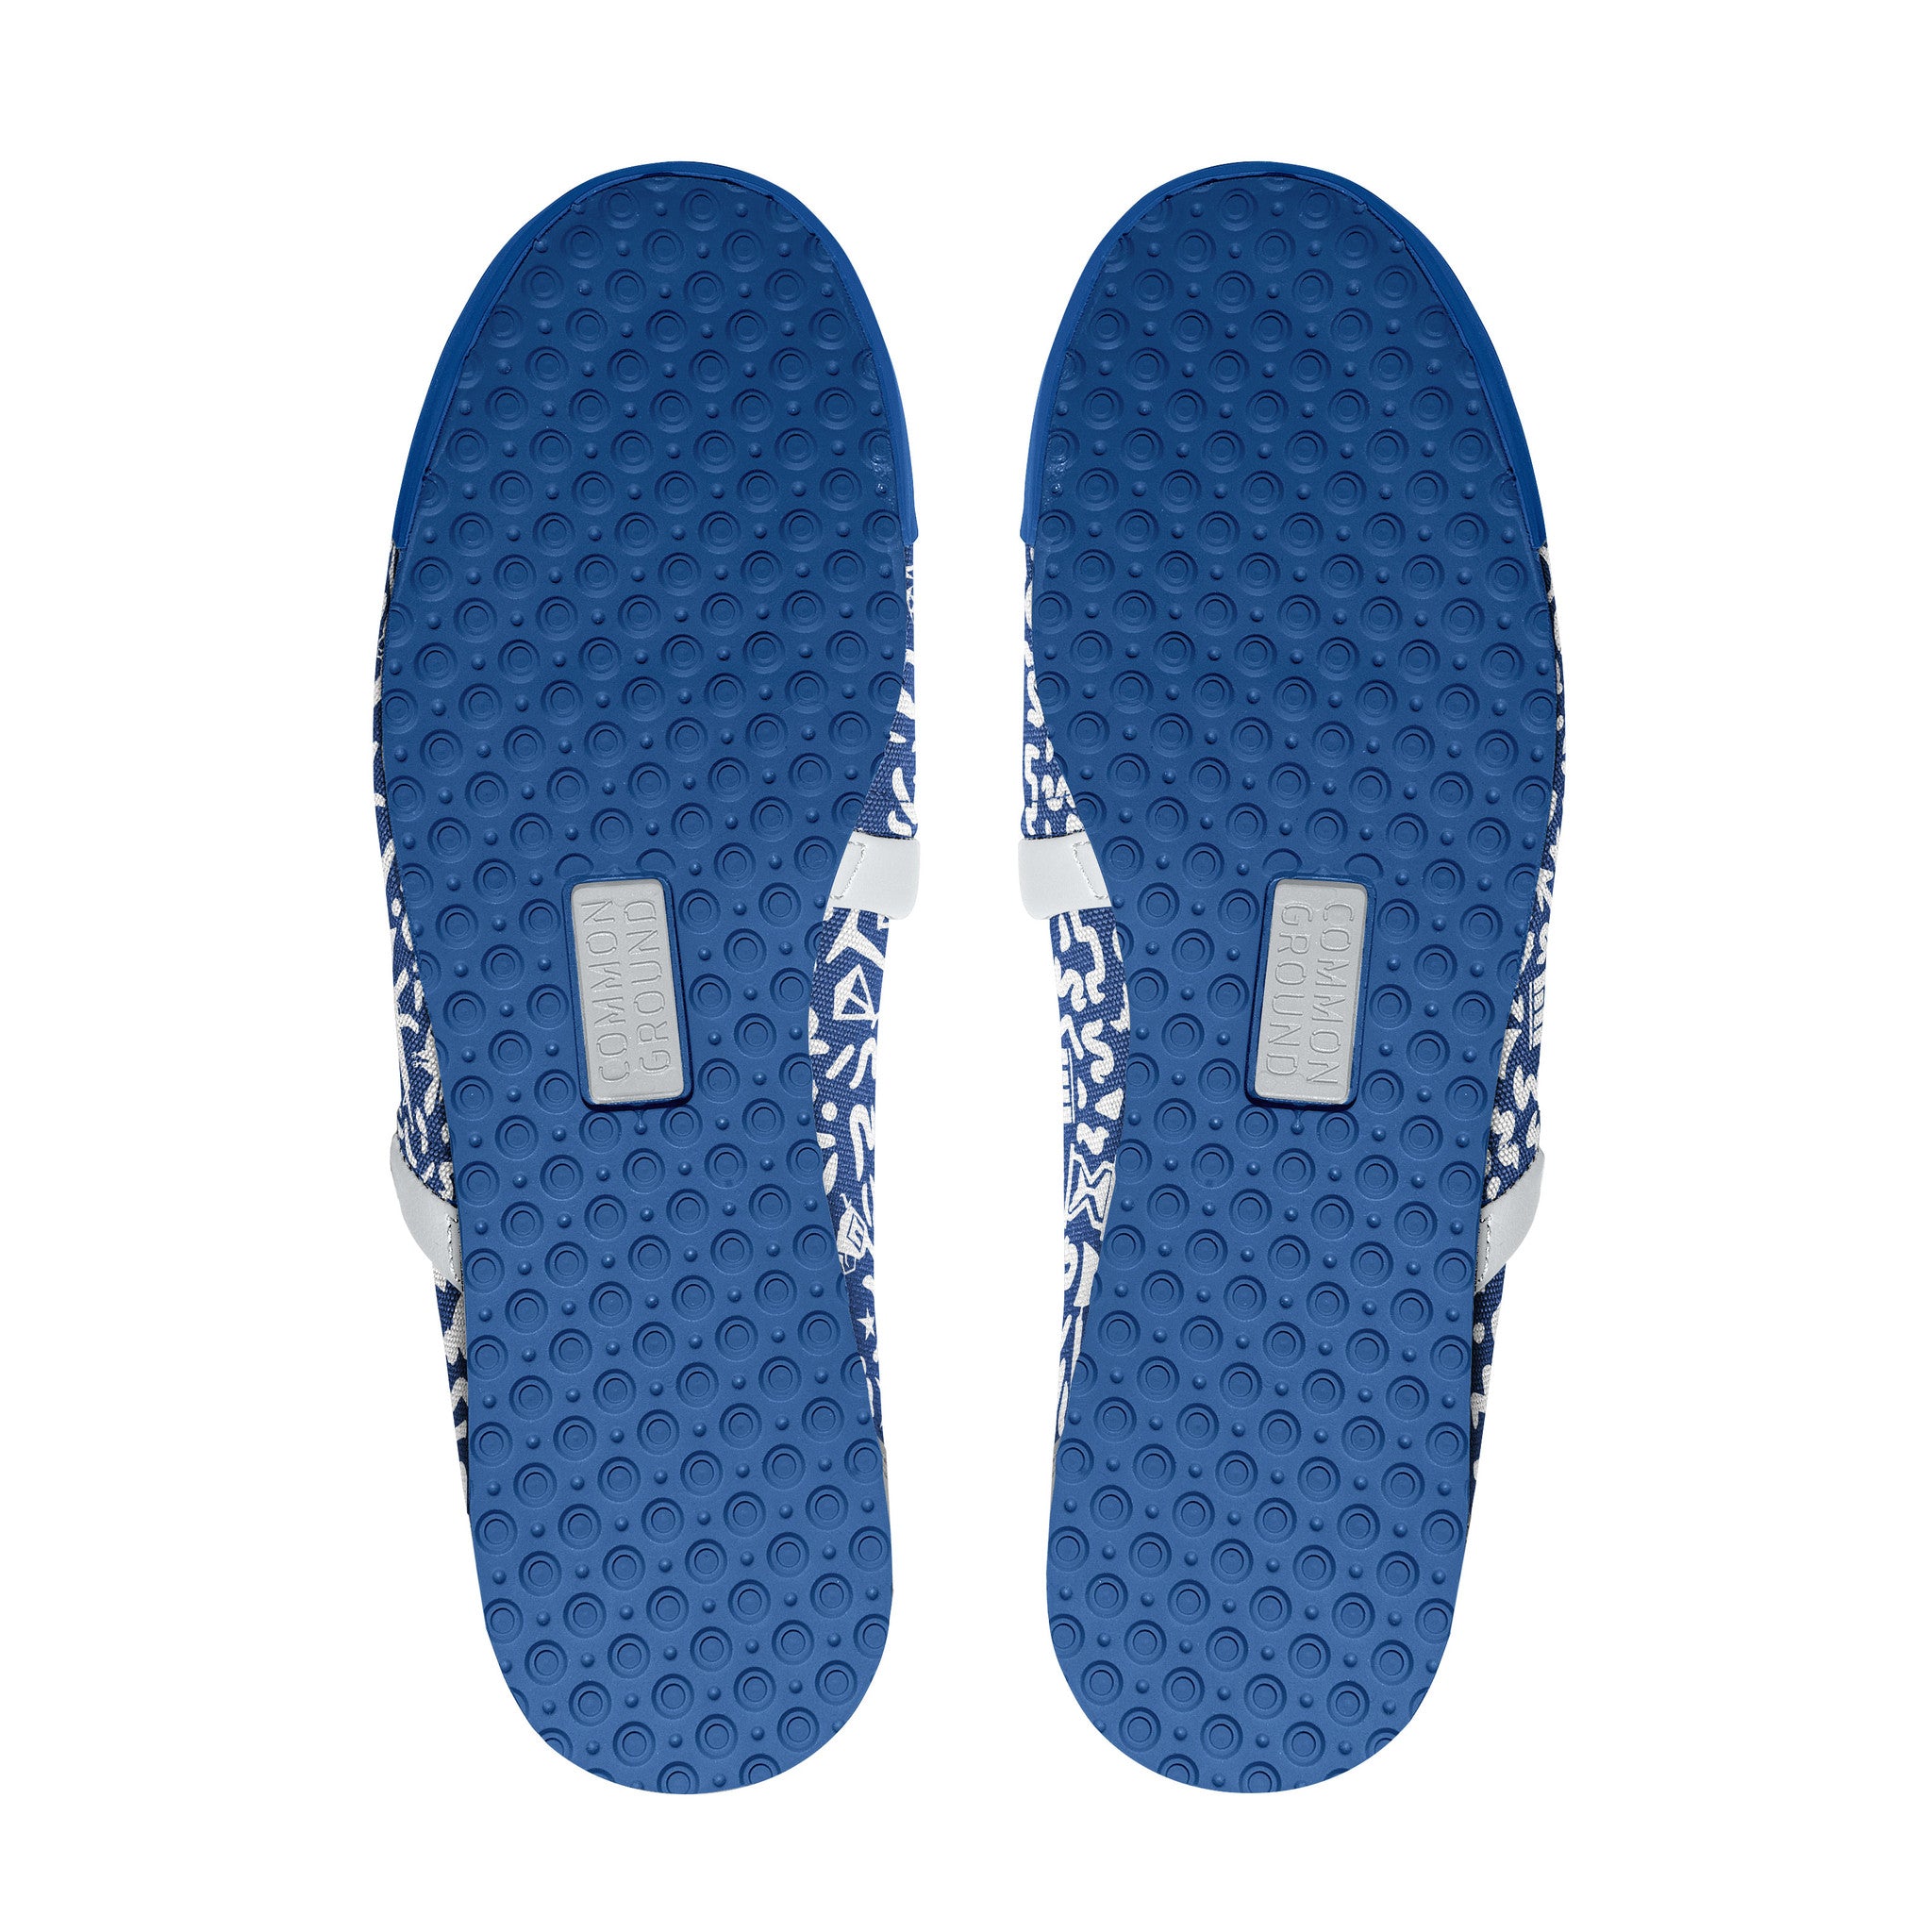 Strong_Blue - Common Ground Footwear Shoes Bottom View